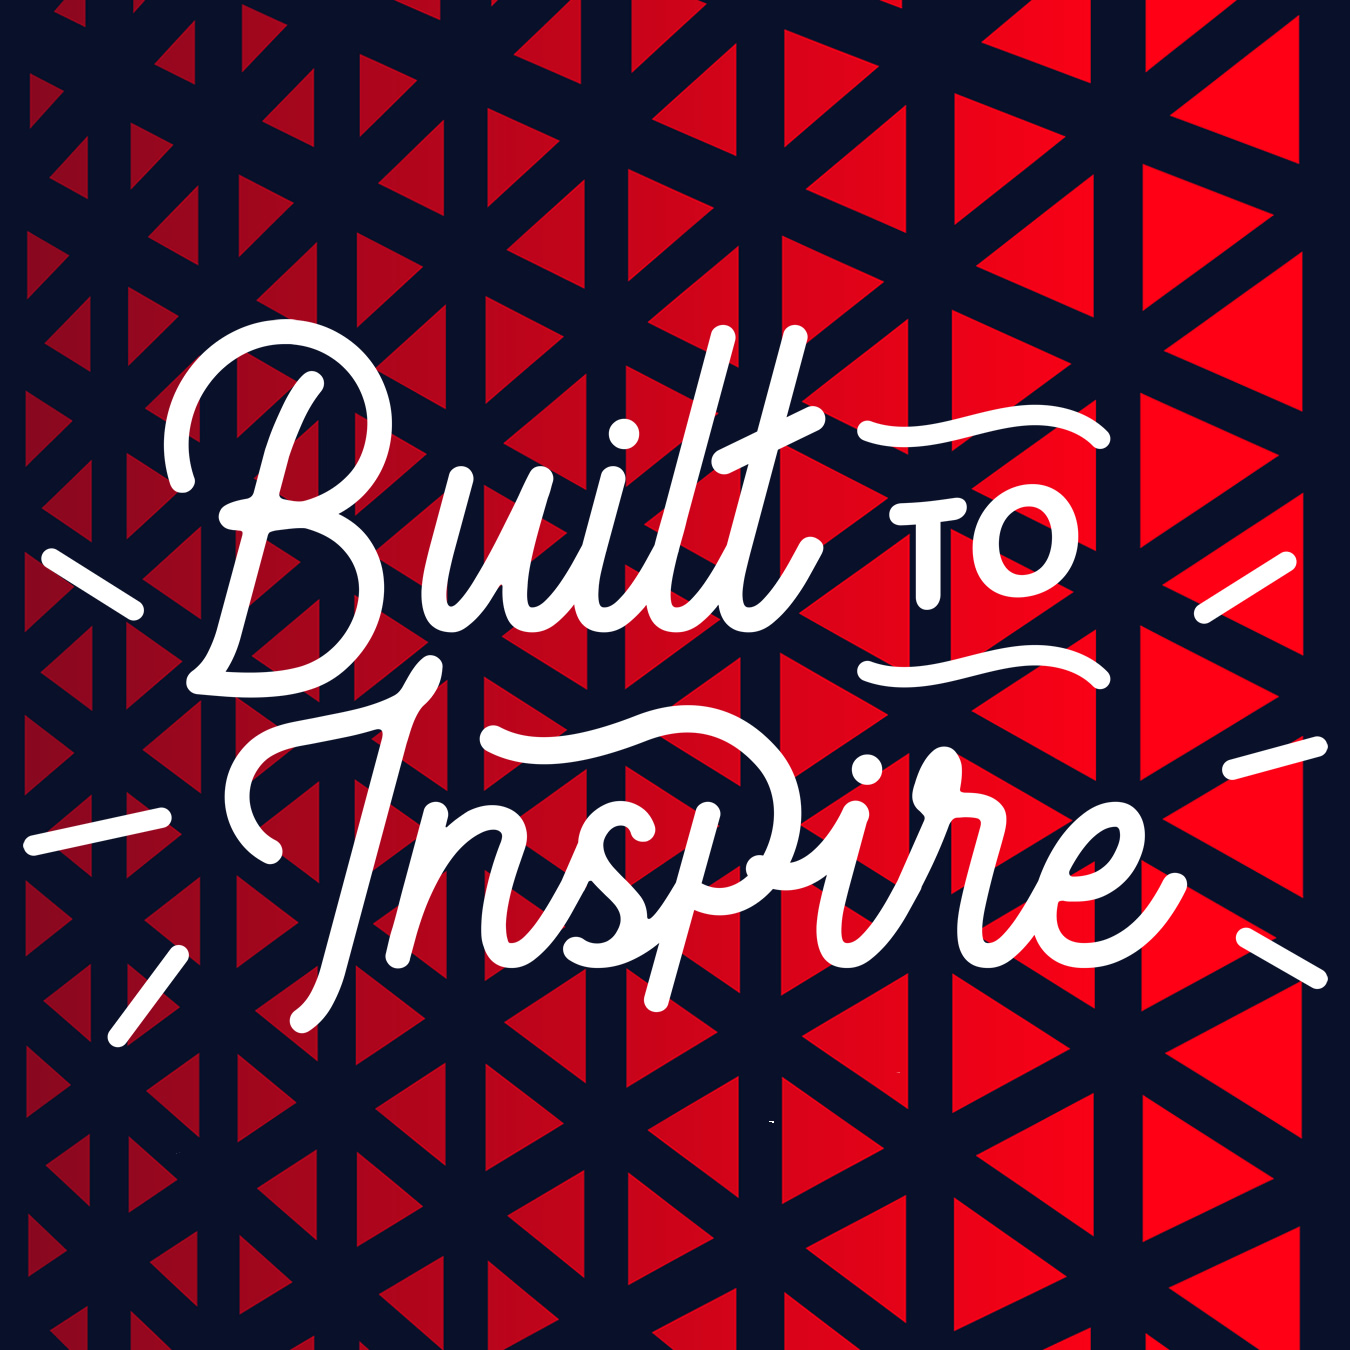 Our Motto - Built To Inspire